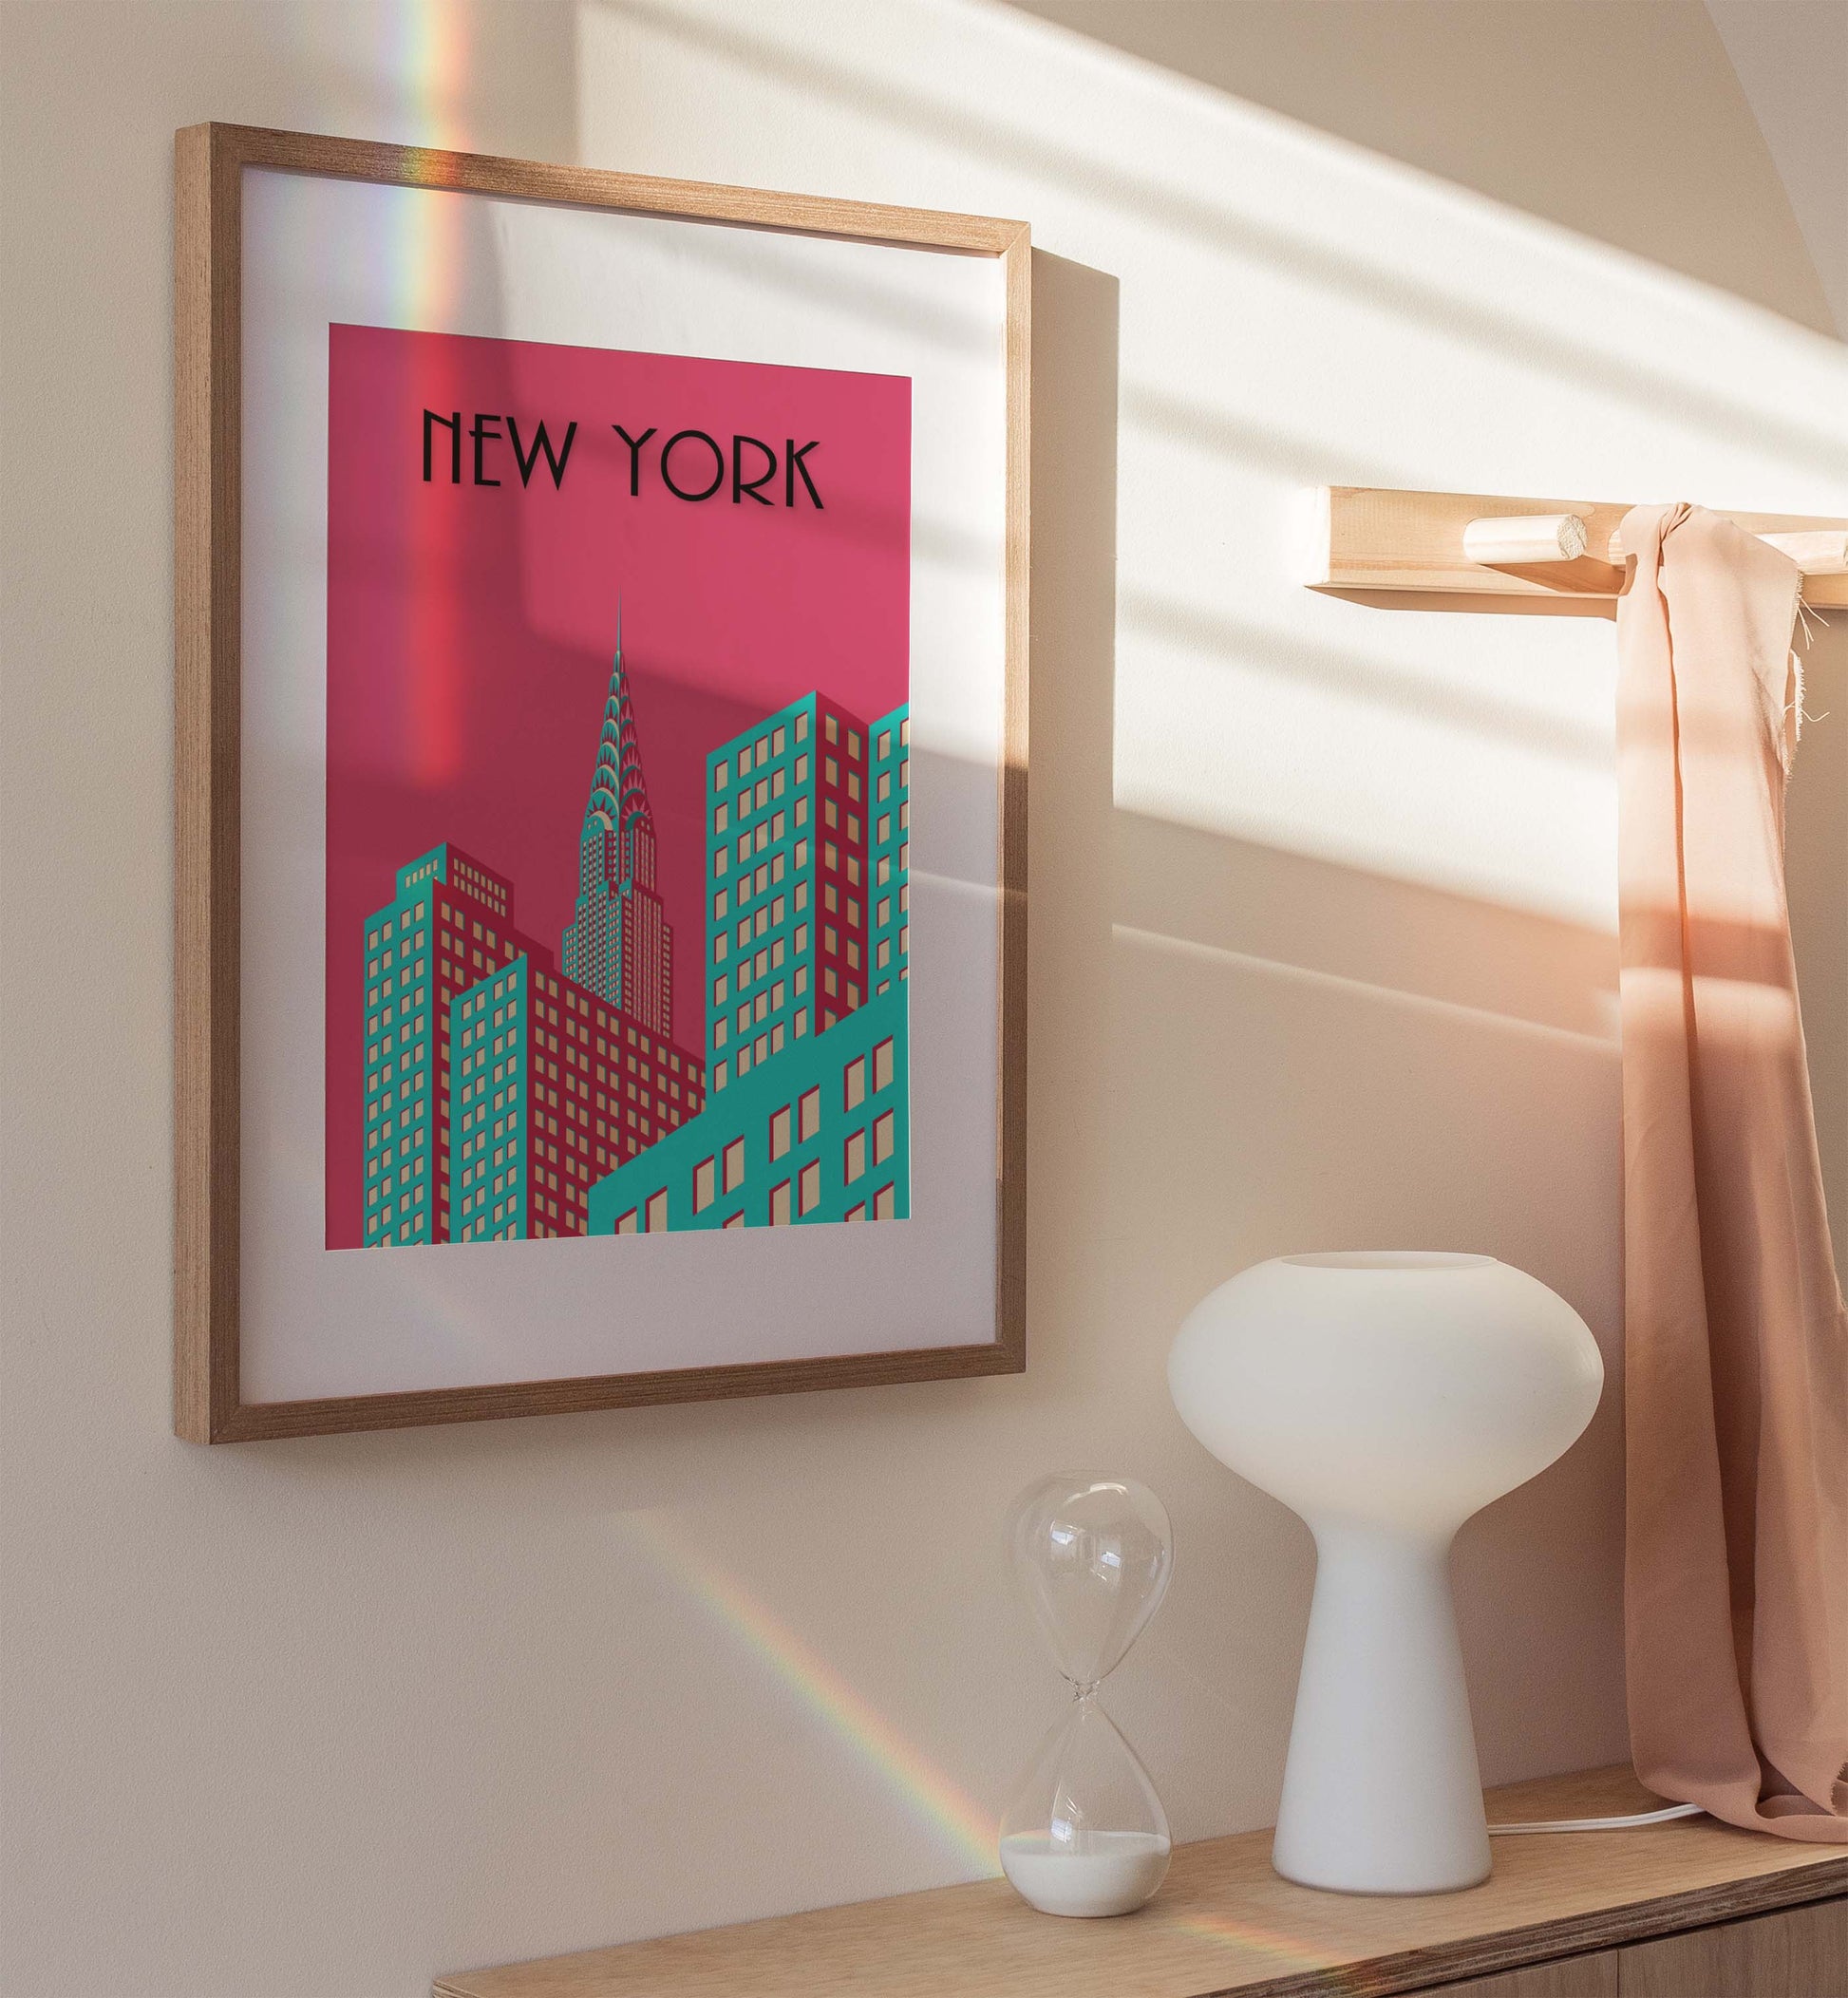 Pink New York poster in an art deco style